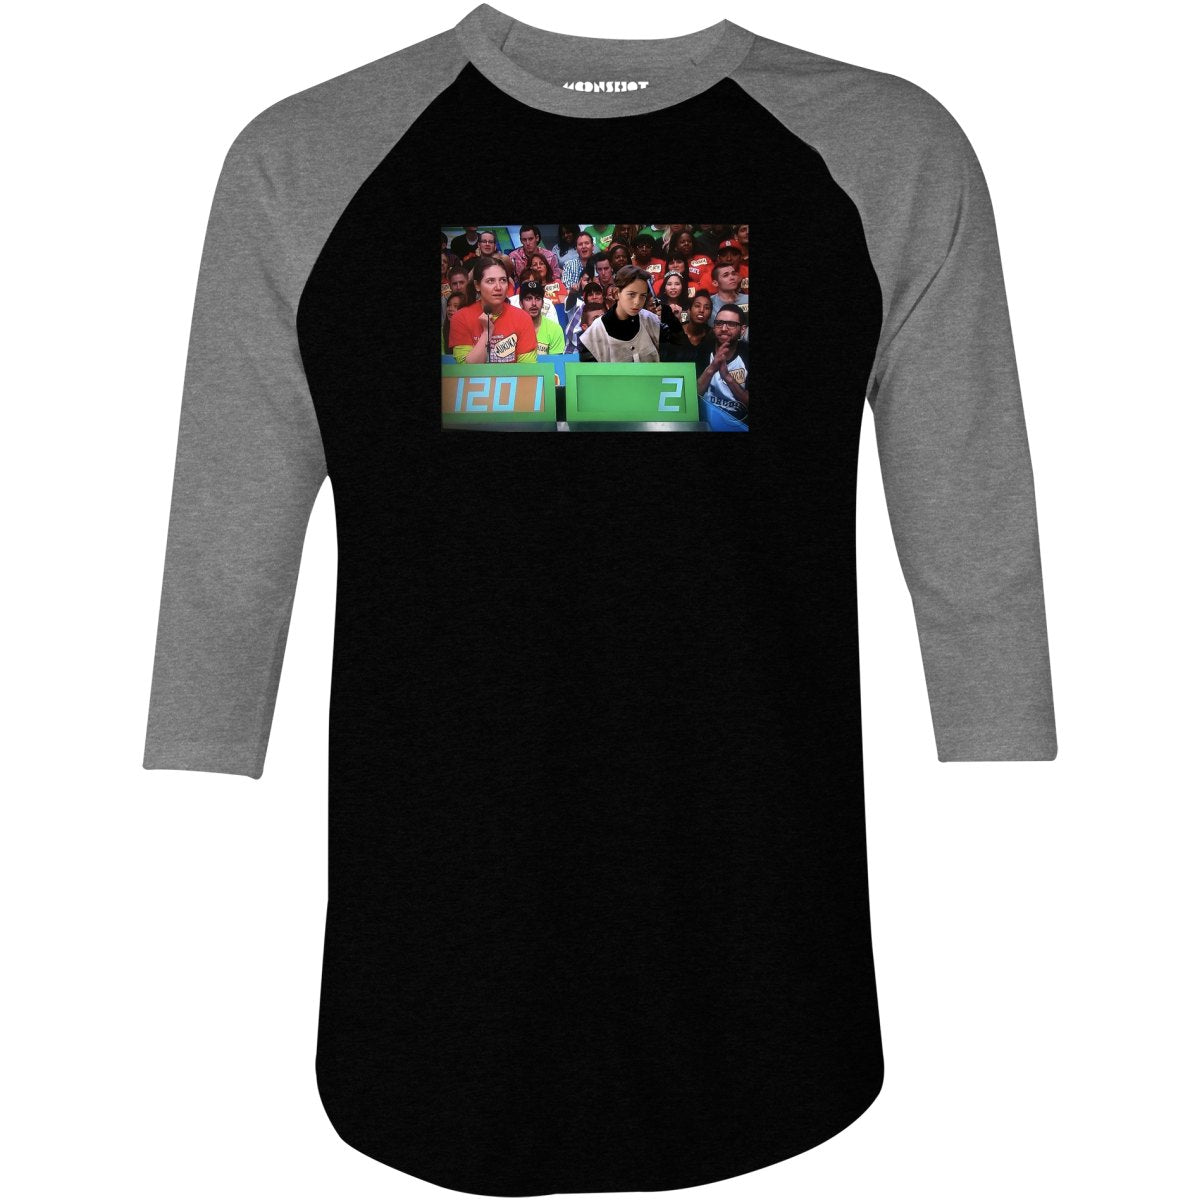 Better Off Dead The Price is Right Mashup - 3/4 Sleeve Raglan T-Shirt